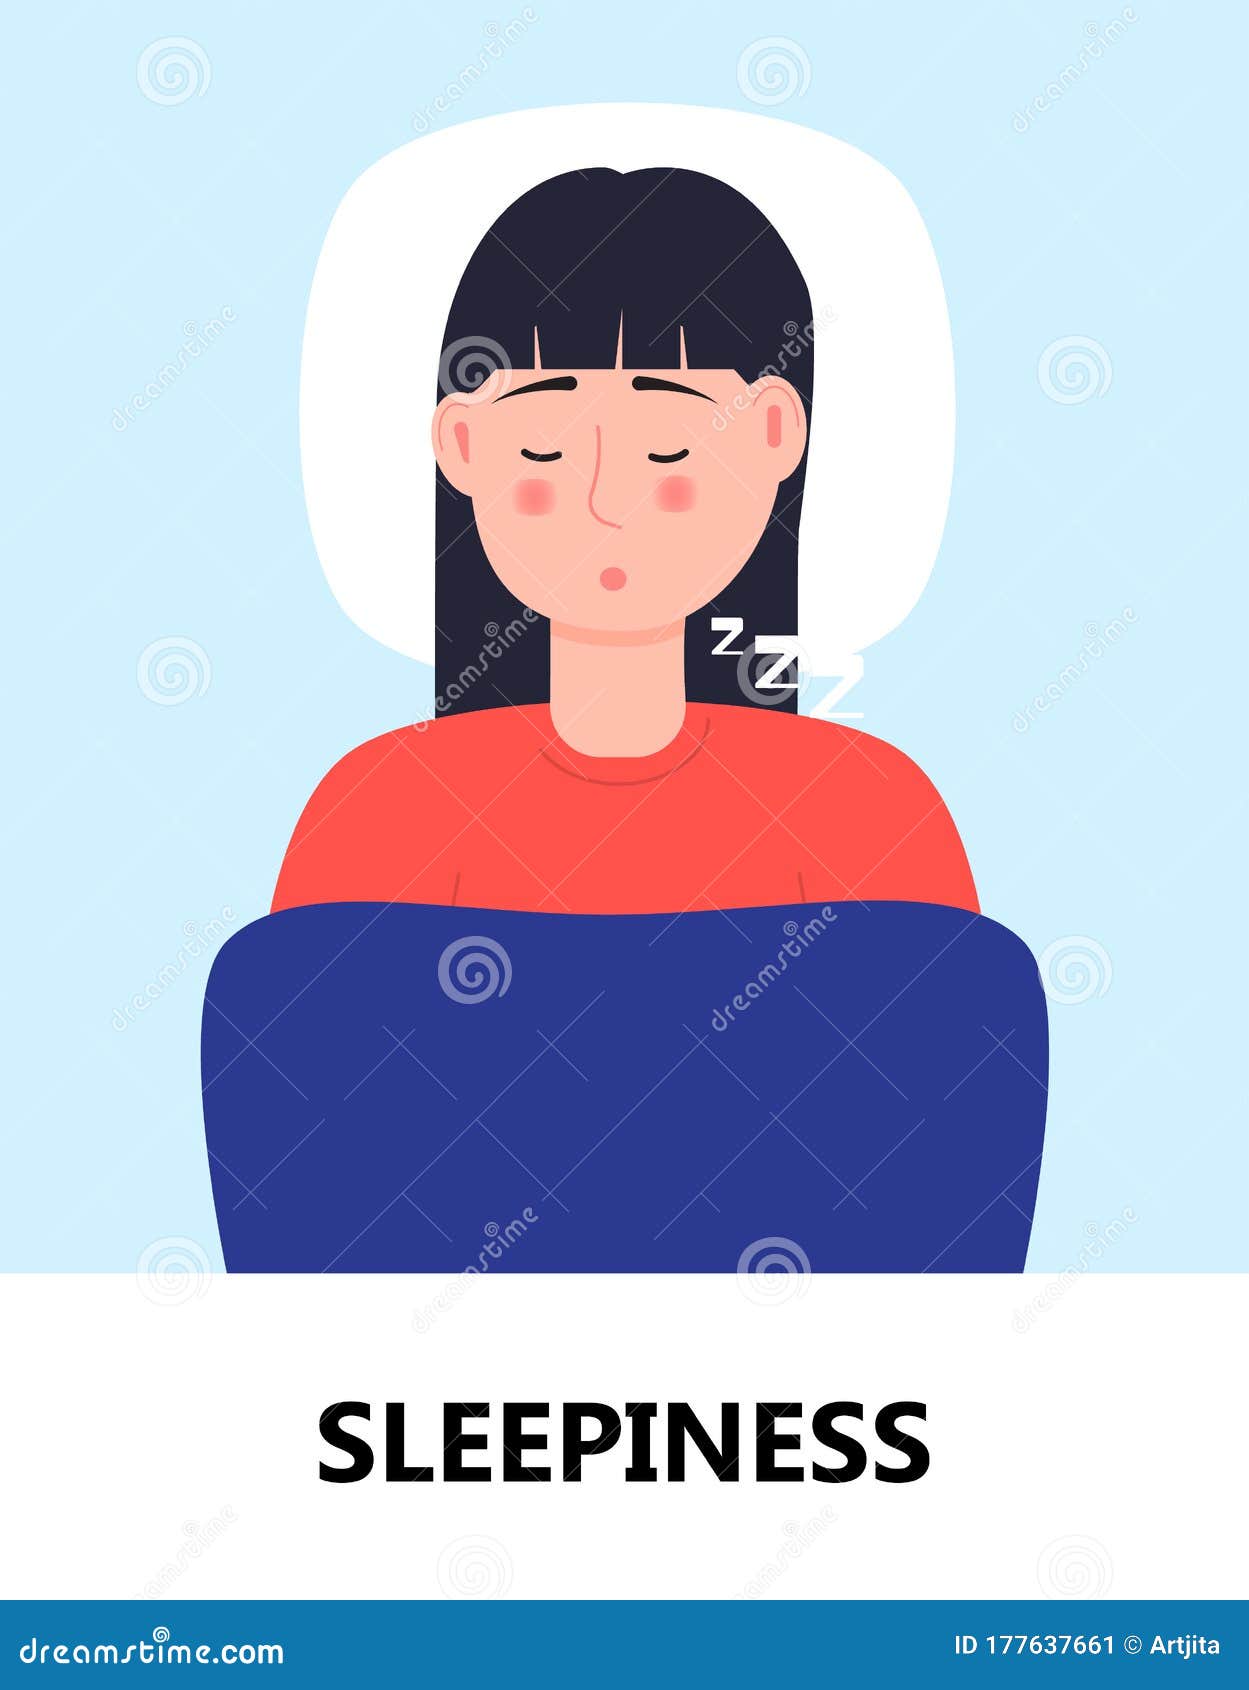 sleepiness icon . flu, cold, coronavirus symptom is shown. woman is sleeping. infected person with painful